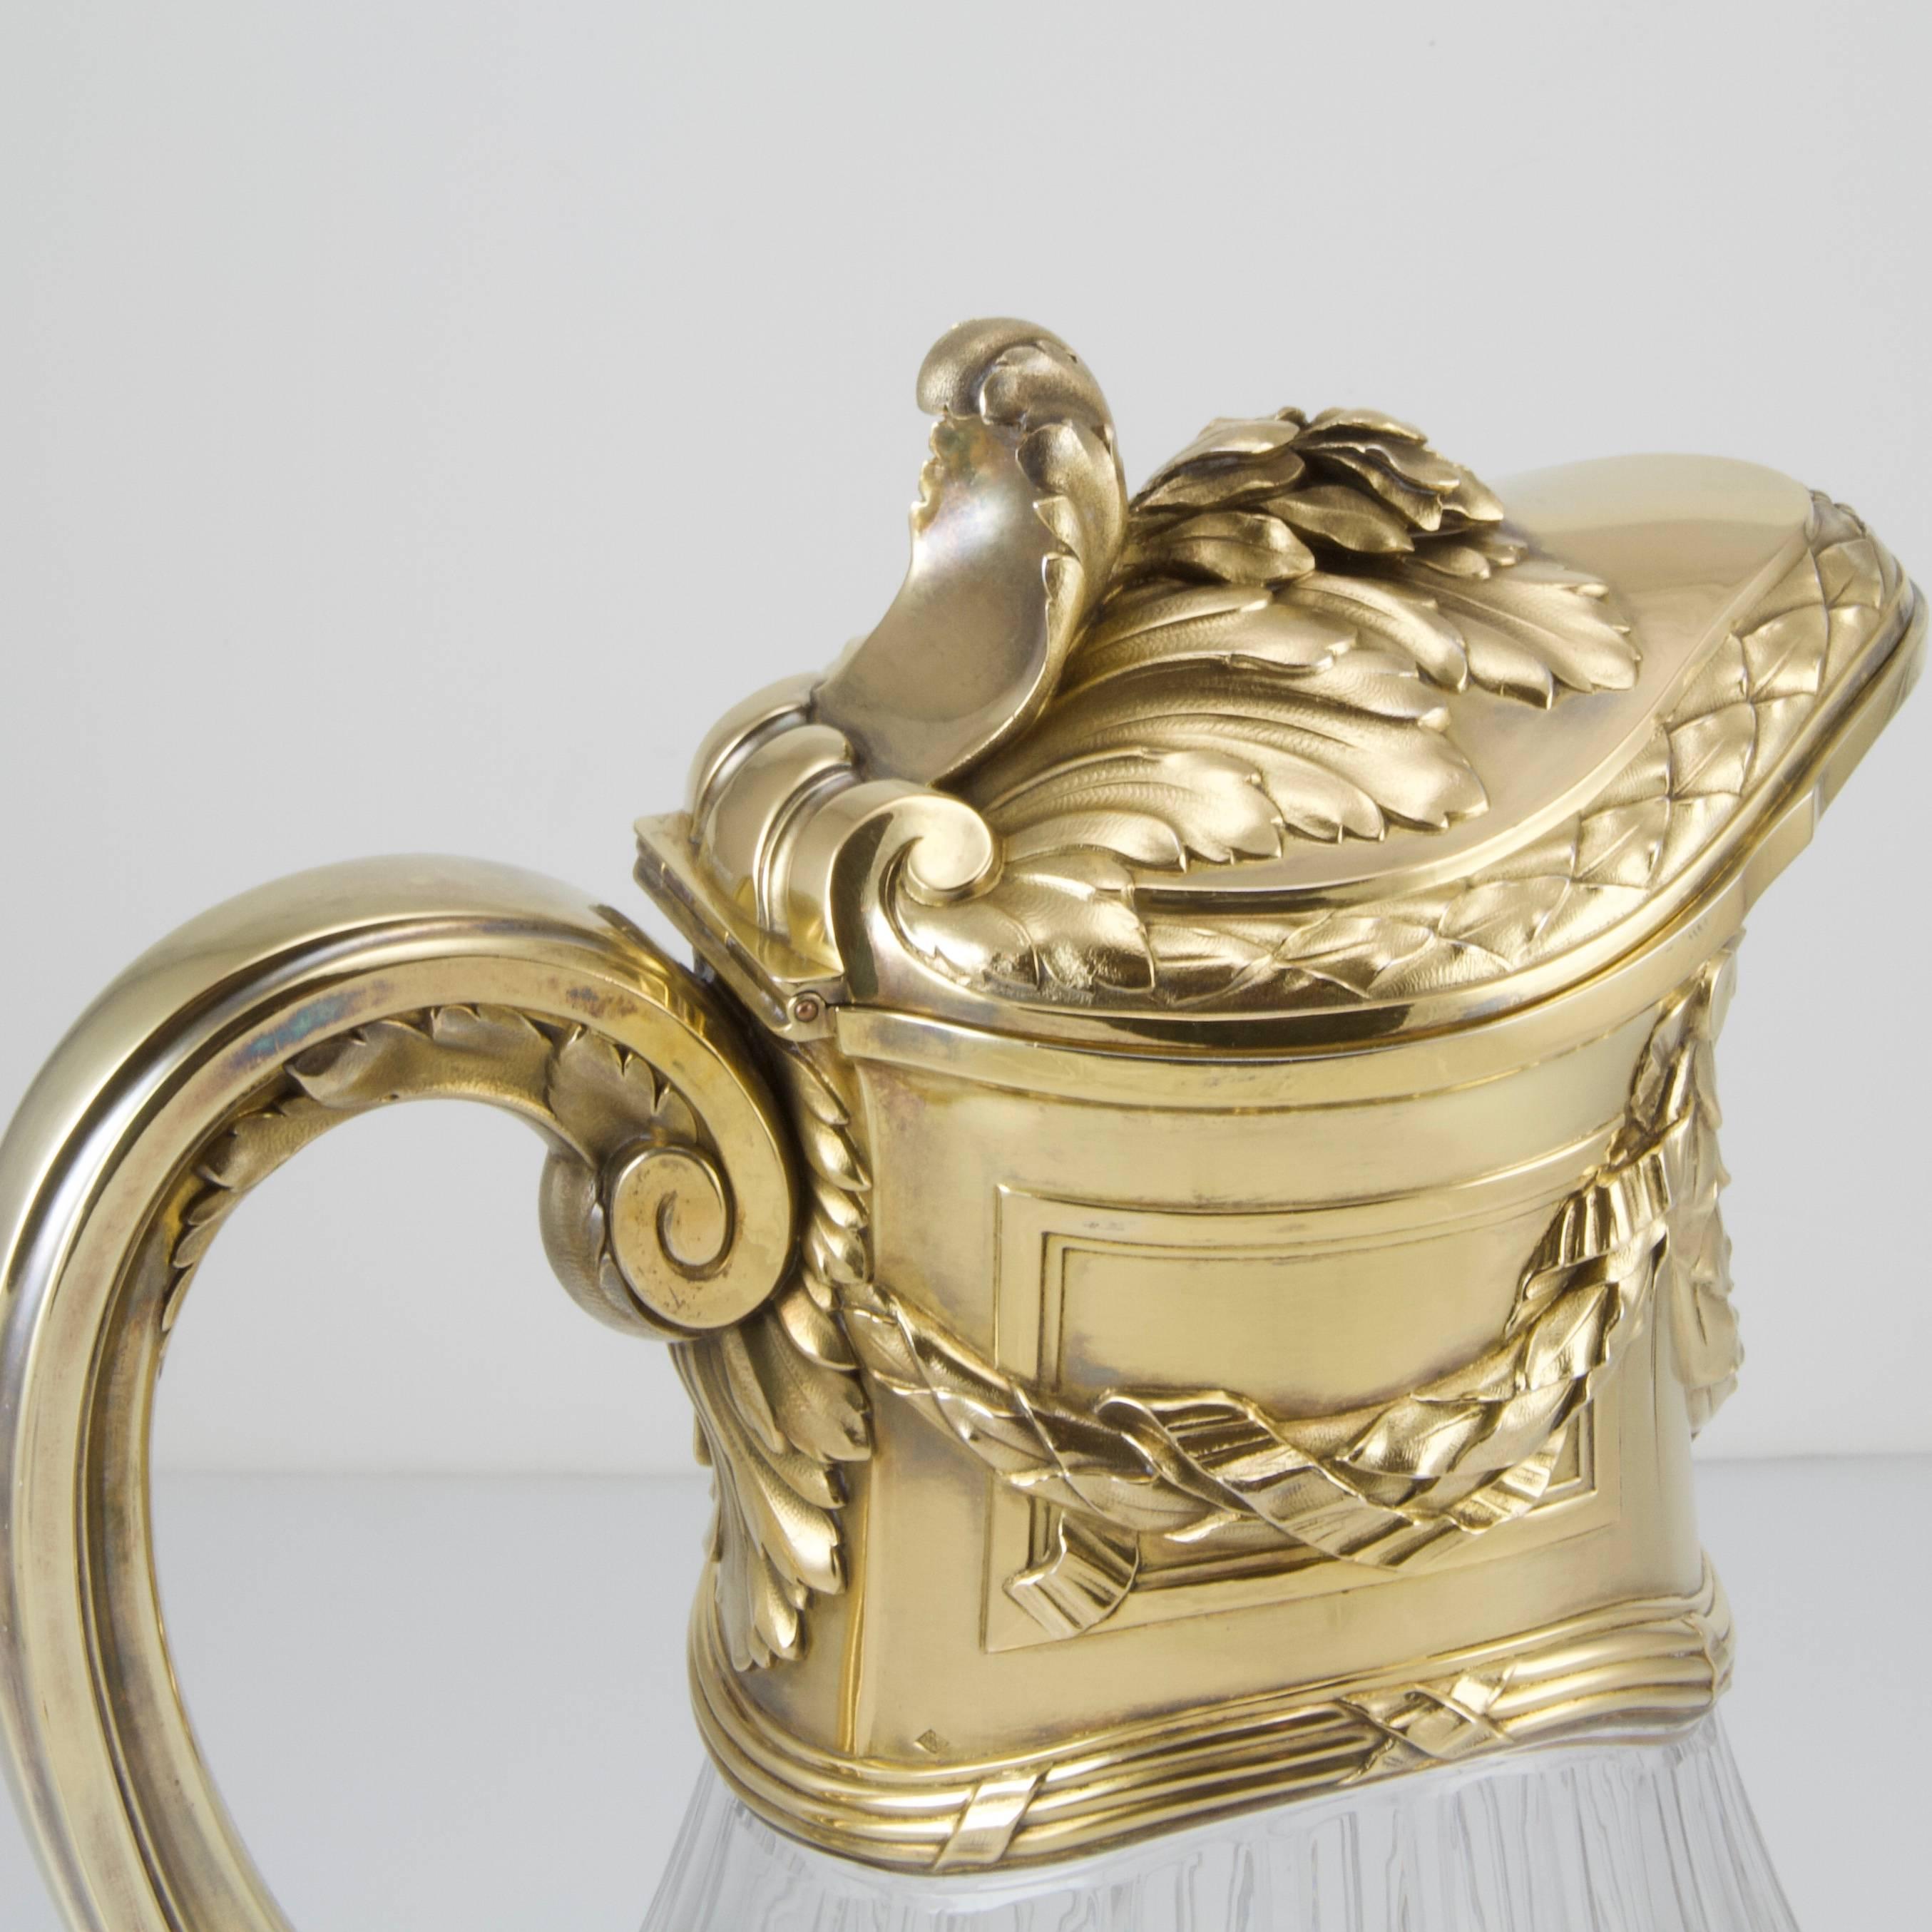 A very gorgeous and high-standard champagne jug. Silver gilt chiseled mounting on a crystal carved body.
Ducal crown.
In its original case.
Made by Risler & Carré.
Maker's marks, twice and signature on the cover.
French assay marks.
Risler et